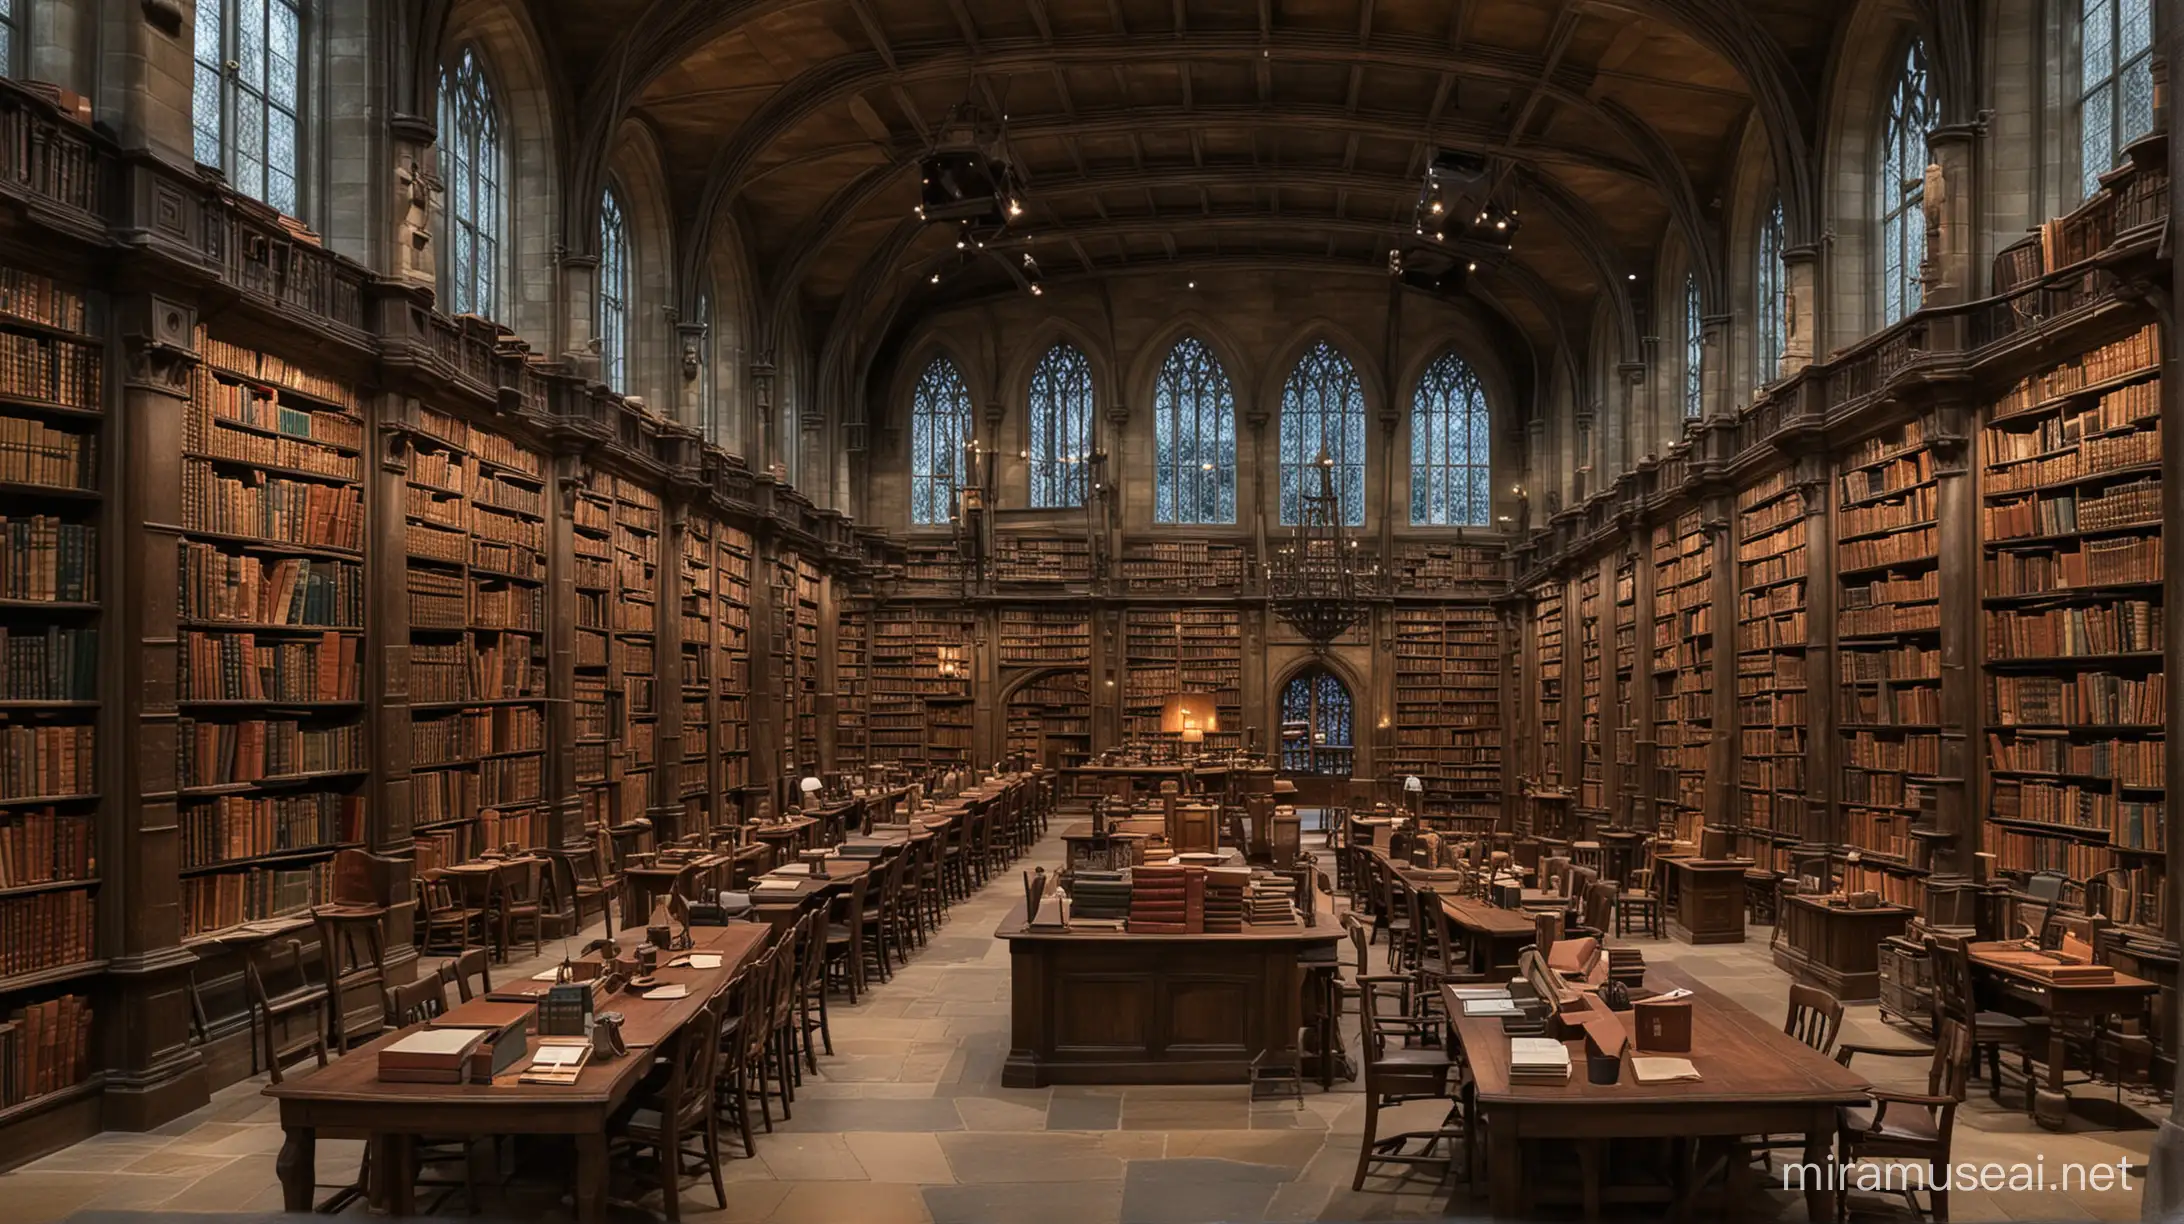 Majestic Harry PotterThemed Library with Enchanted Bookshelves